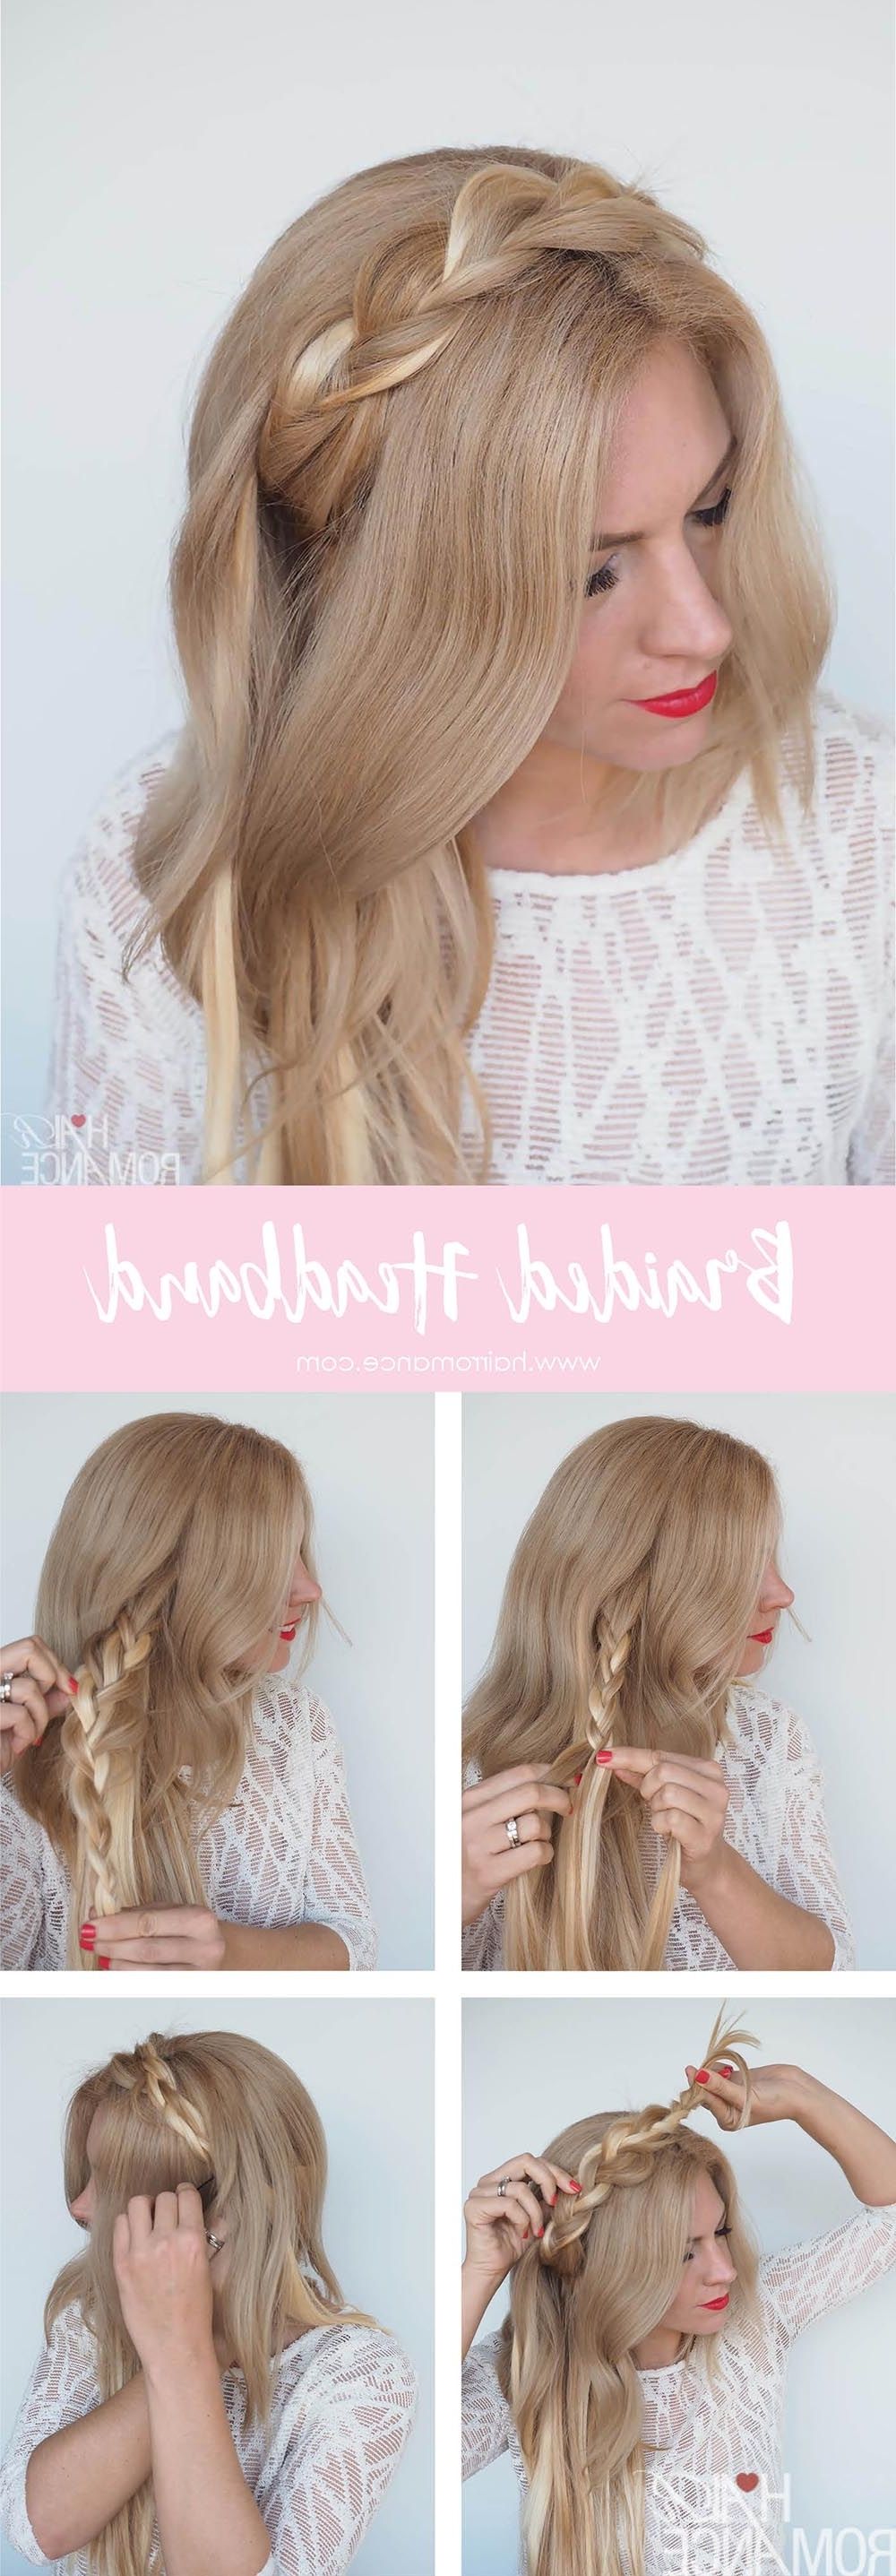 Preferred Headband Braided Hairstyles With Regard To Braided Headband Hairstyle Tutorial – Hair Romance (View 4 of 15)